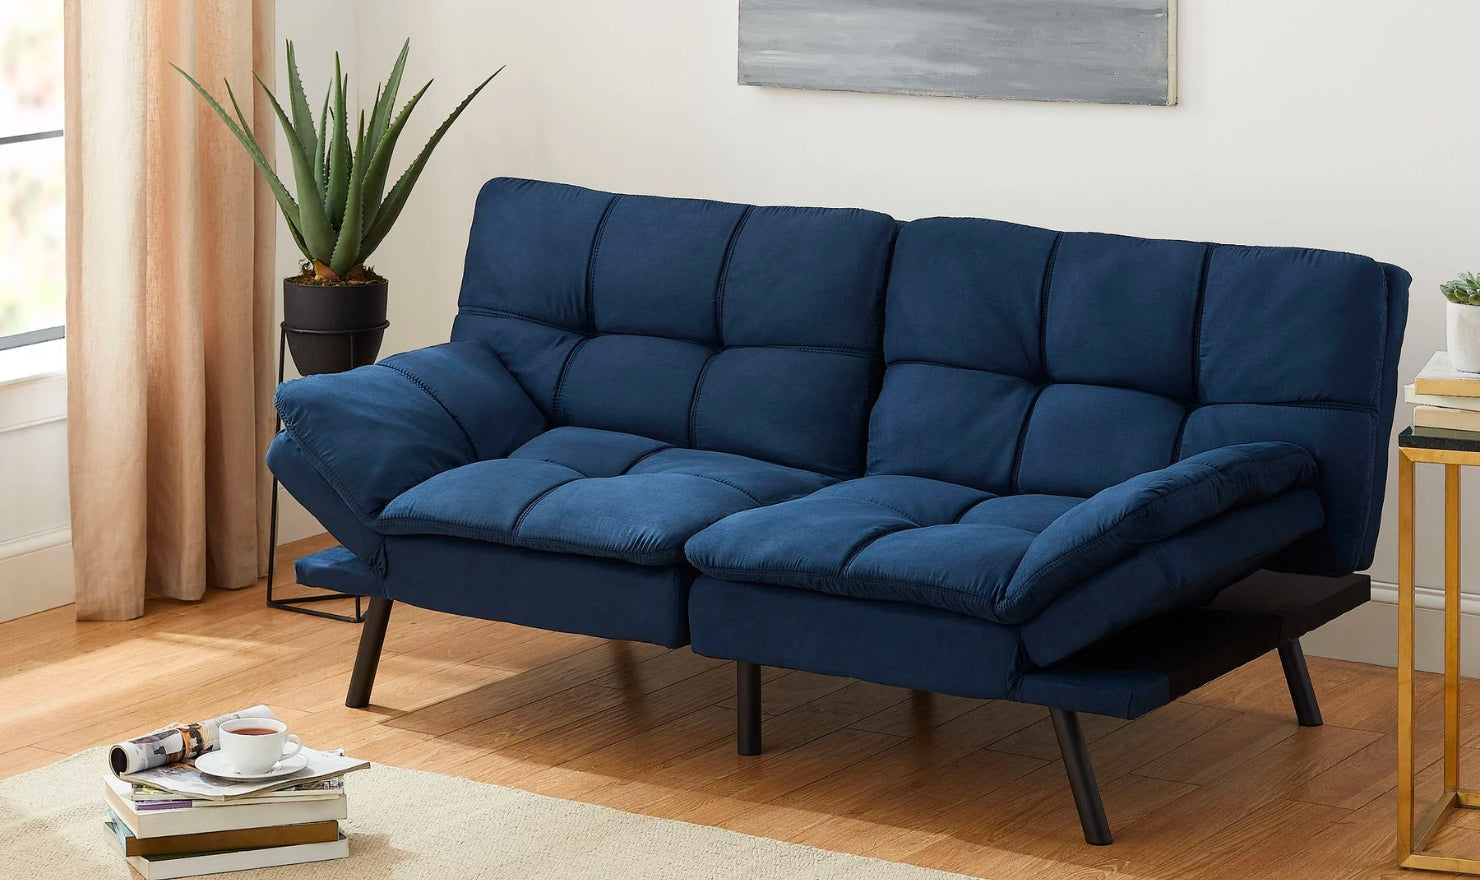 Sofa Beds Vs Futons - Do you have space constraints